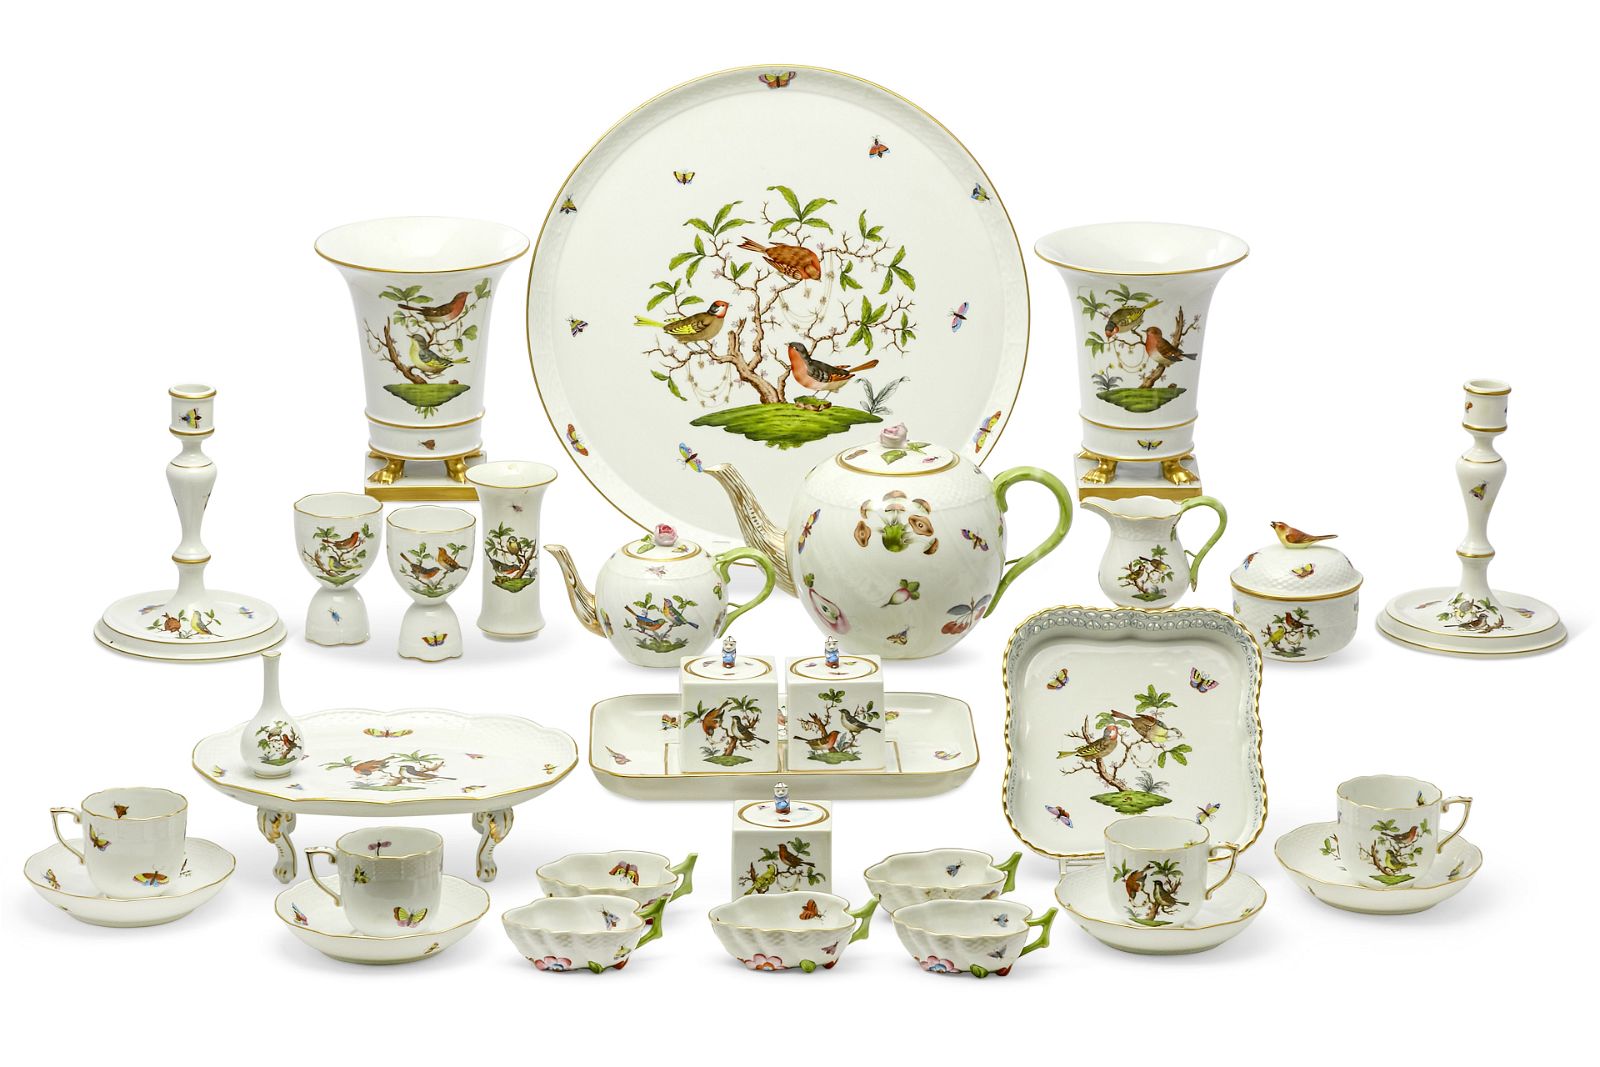 A COLLECTION OF HEREND PORCELAIN 2fb3c48